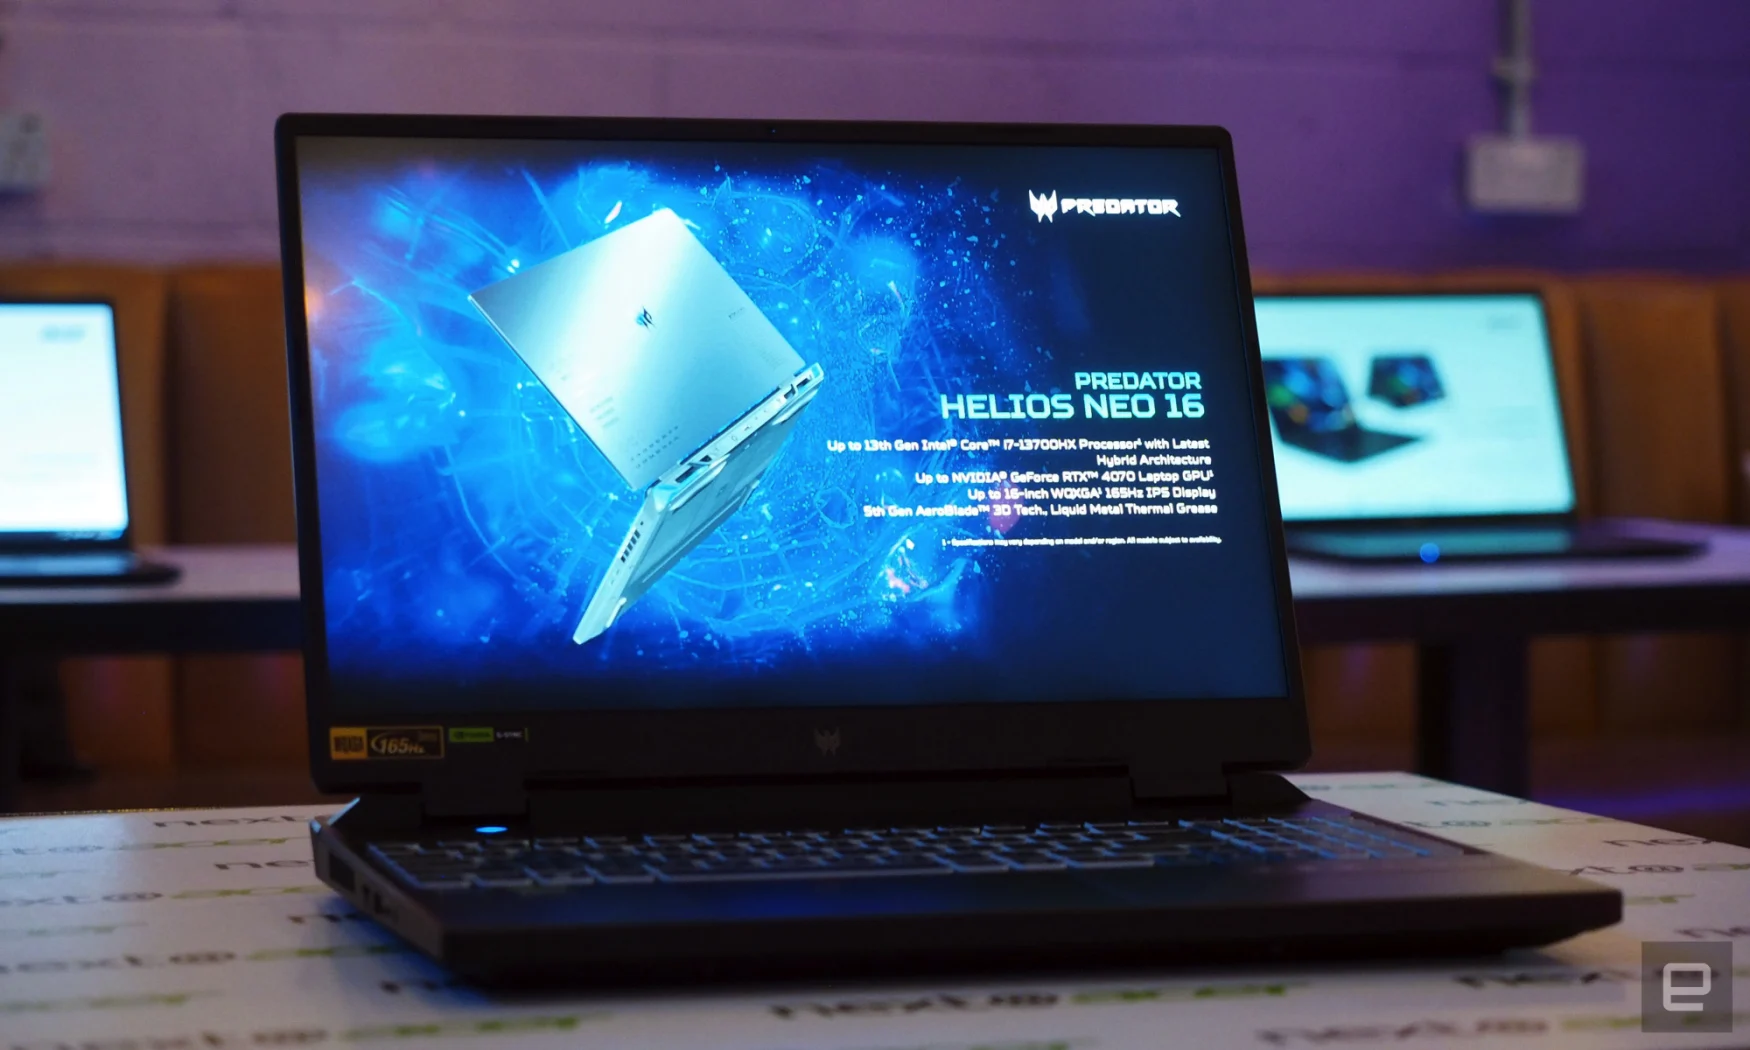 Image of the Acer Predator Helios Neo 16 on a table.